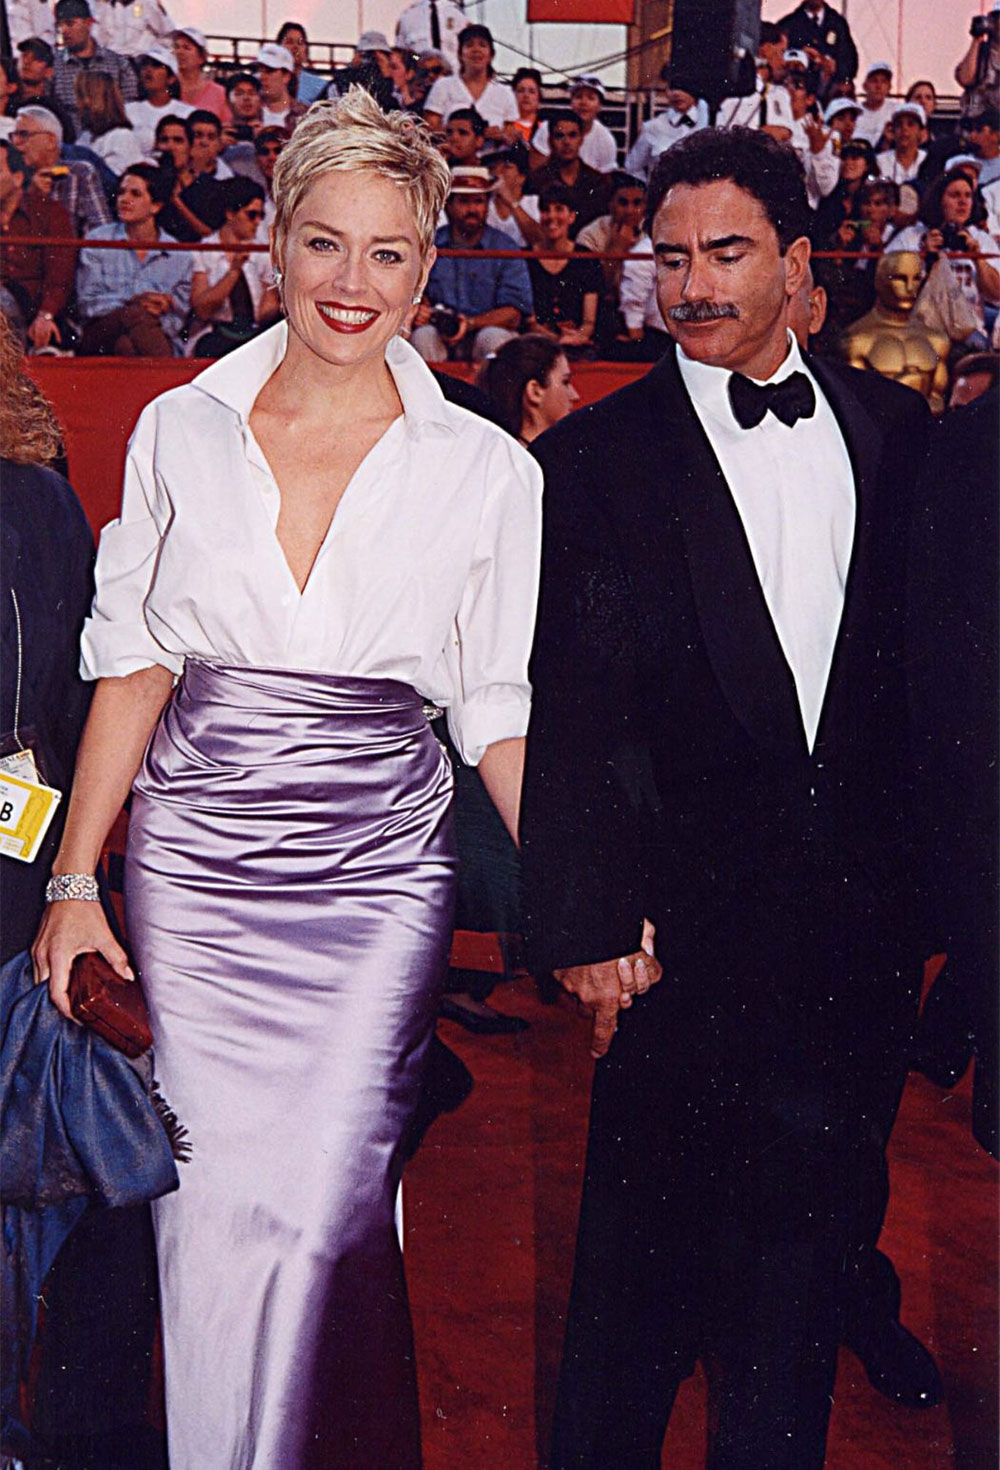 Sharon stone outfit